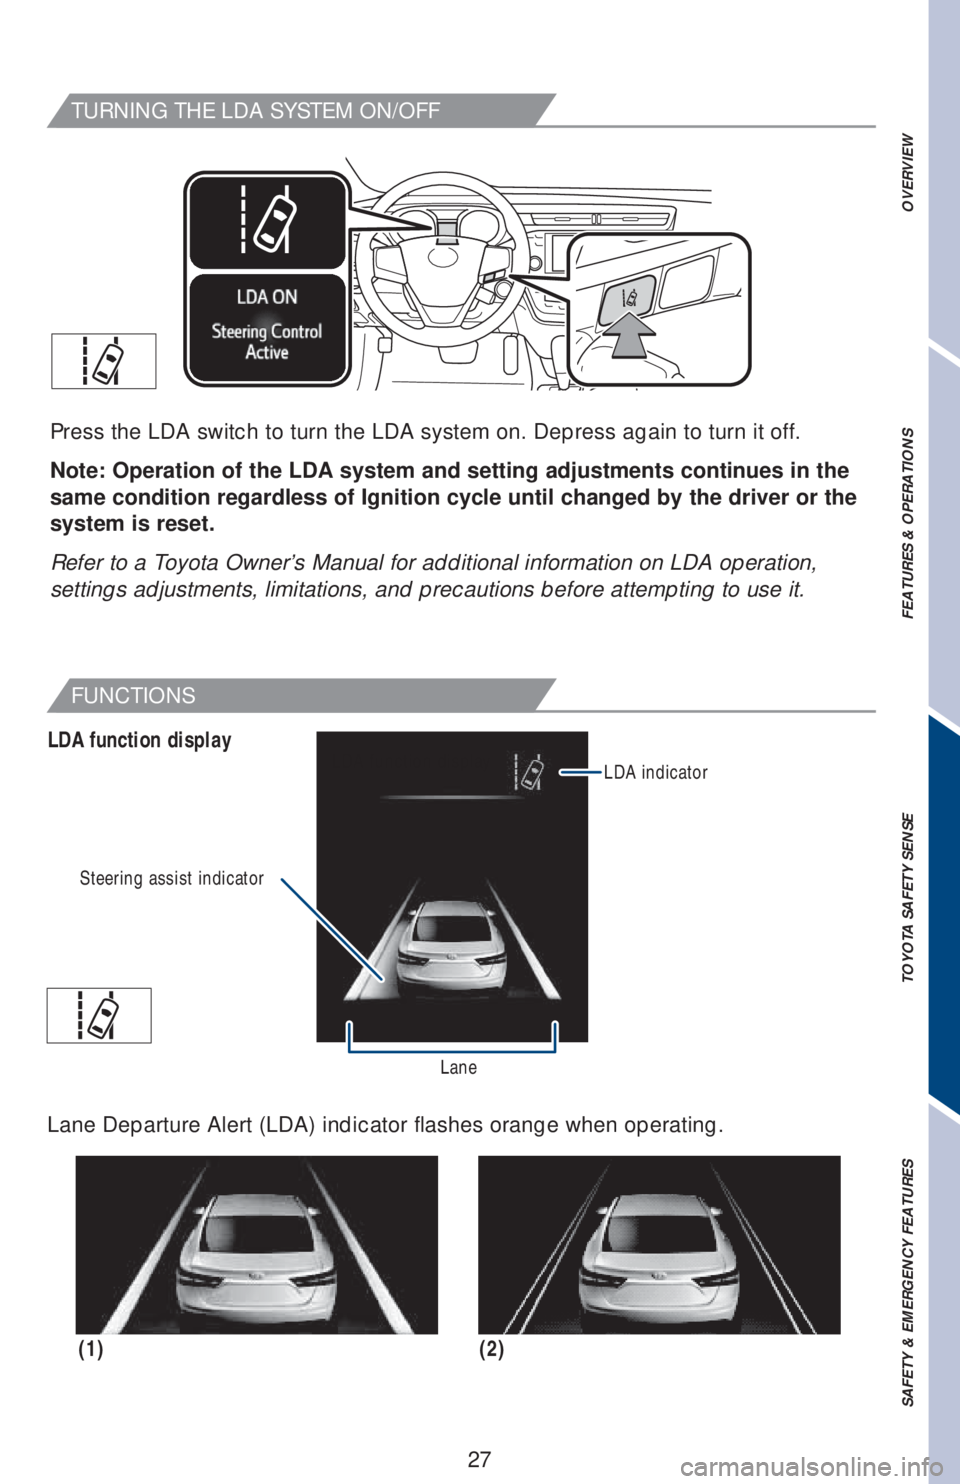 TOYOTA AVALON 2018  Owners Manual (in English) 27
OVERVIEW FEATURES & OPERATIONS TOYOTA SAFETY SENSE SAFETY & EMERGENCY FEATURES
TURNING THE LDA SYSTEM ON/OFF
Press the LDA switch to turn the LDA system on. Depress again to turn it off.
Note: Oper